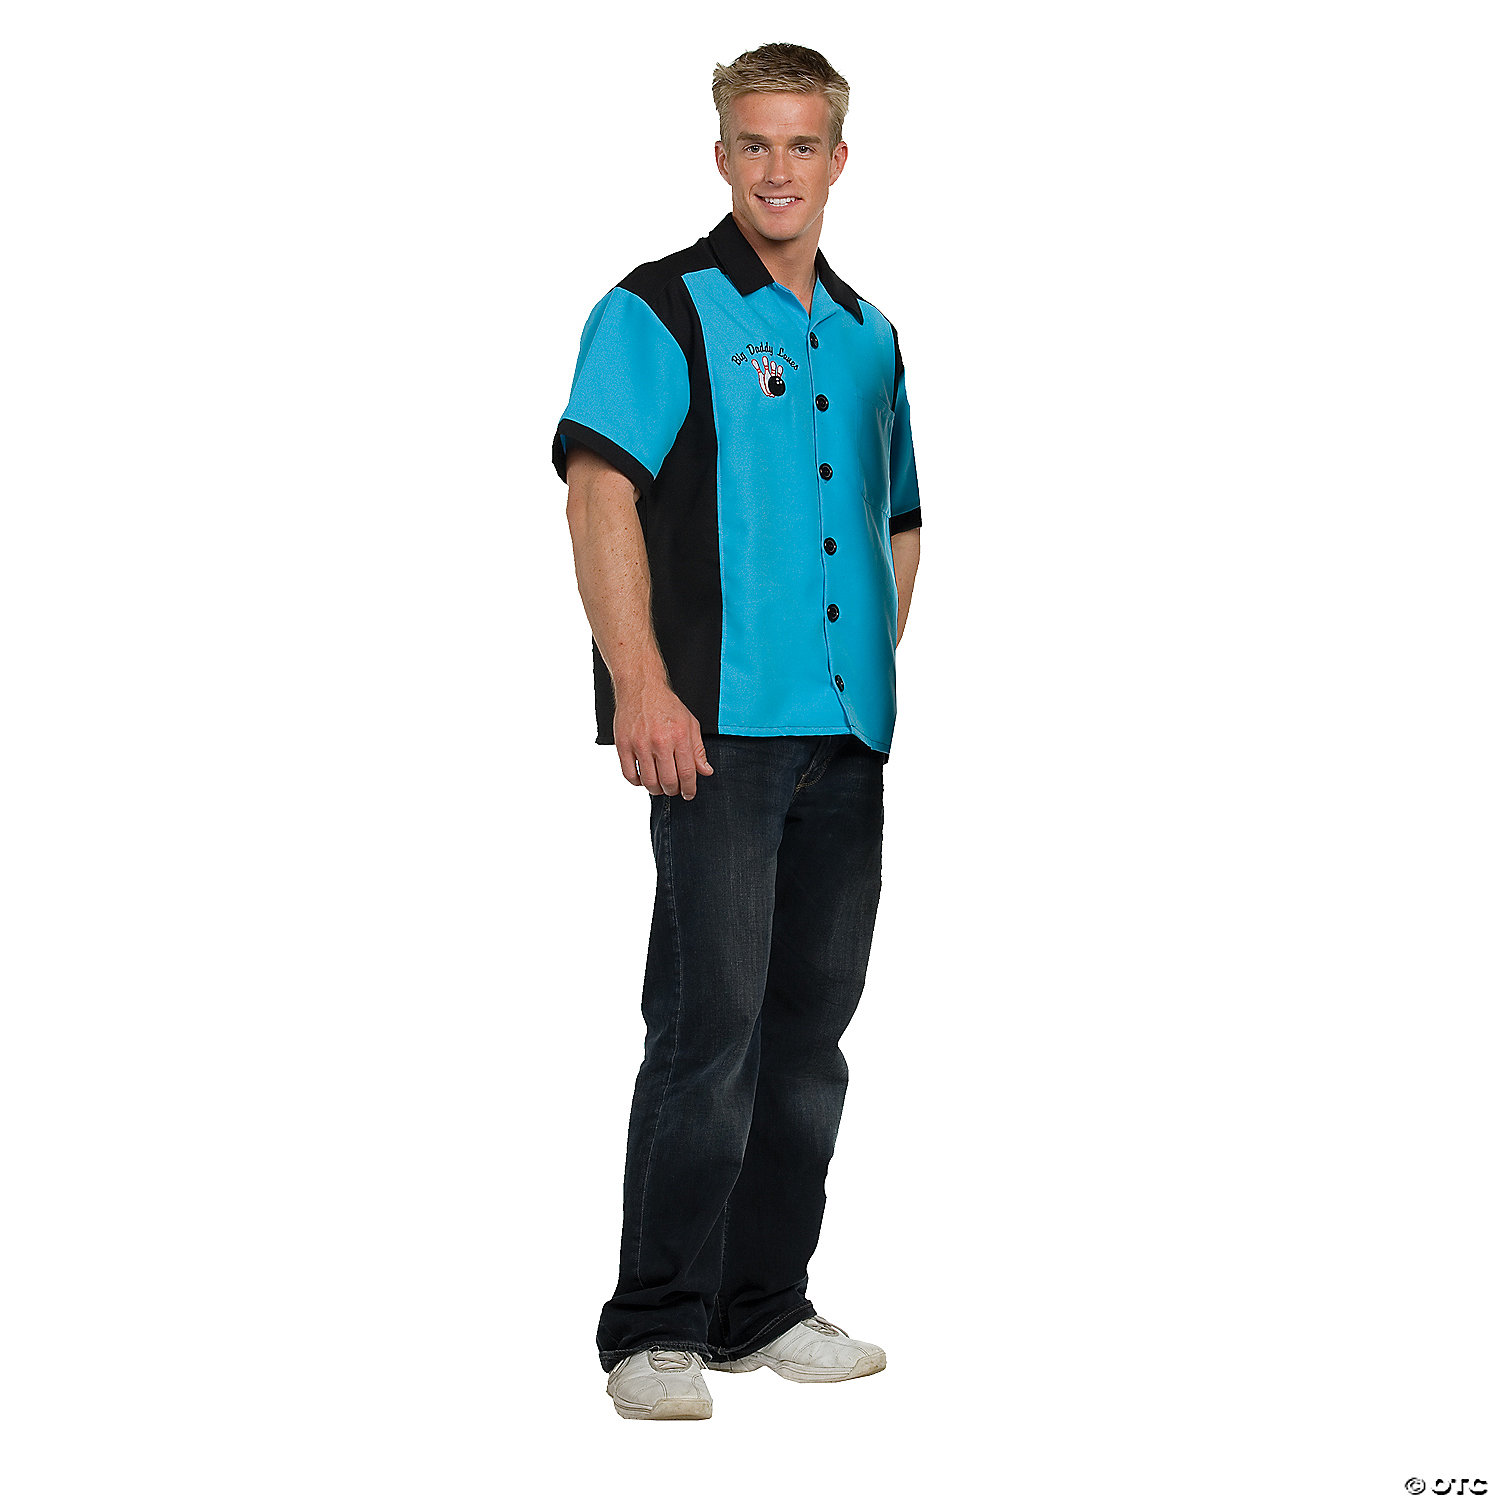 Underwraps Carnival Corp. Men's Bowling Shirt Turquoise Costume - Turquoise And Black - 40-42